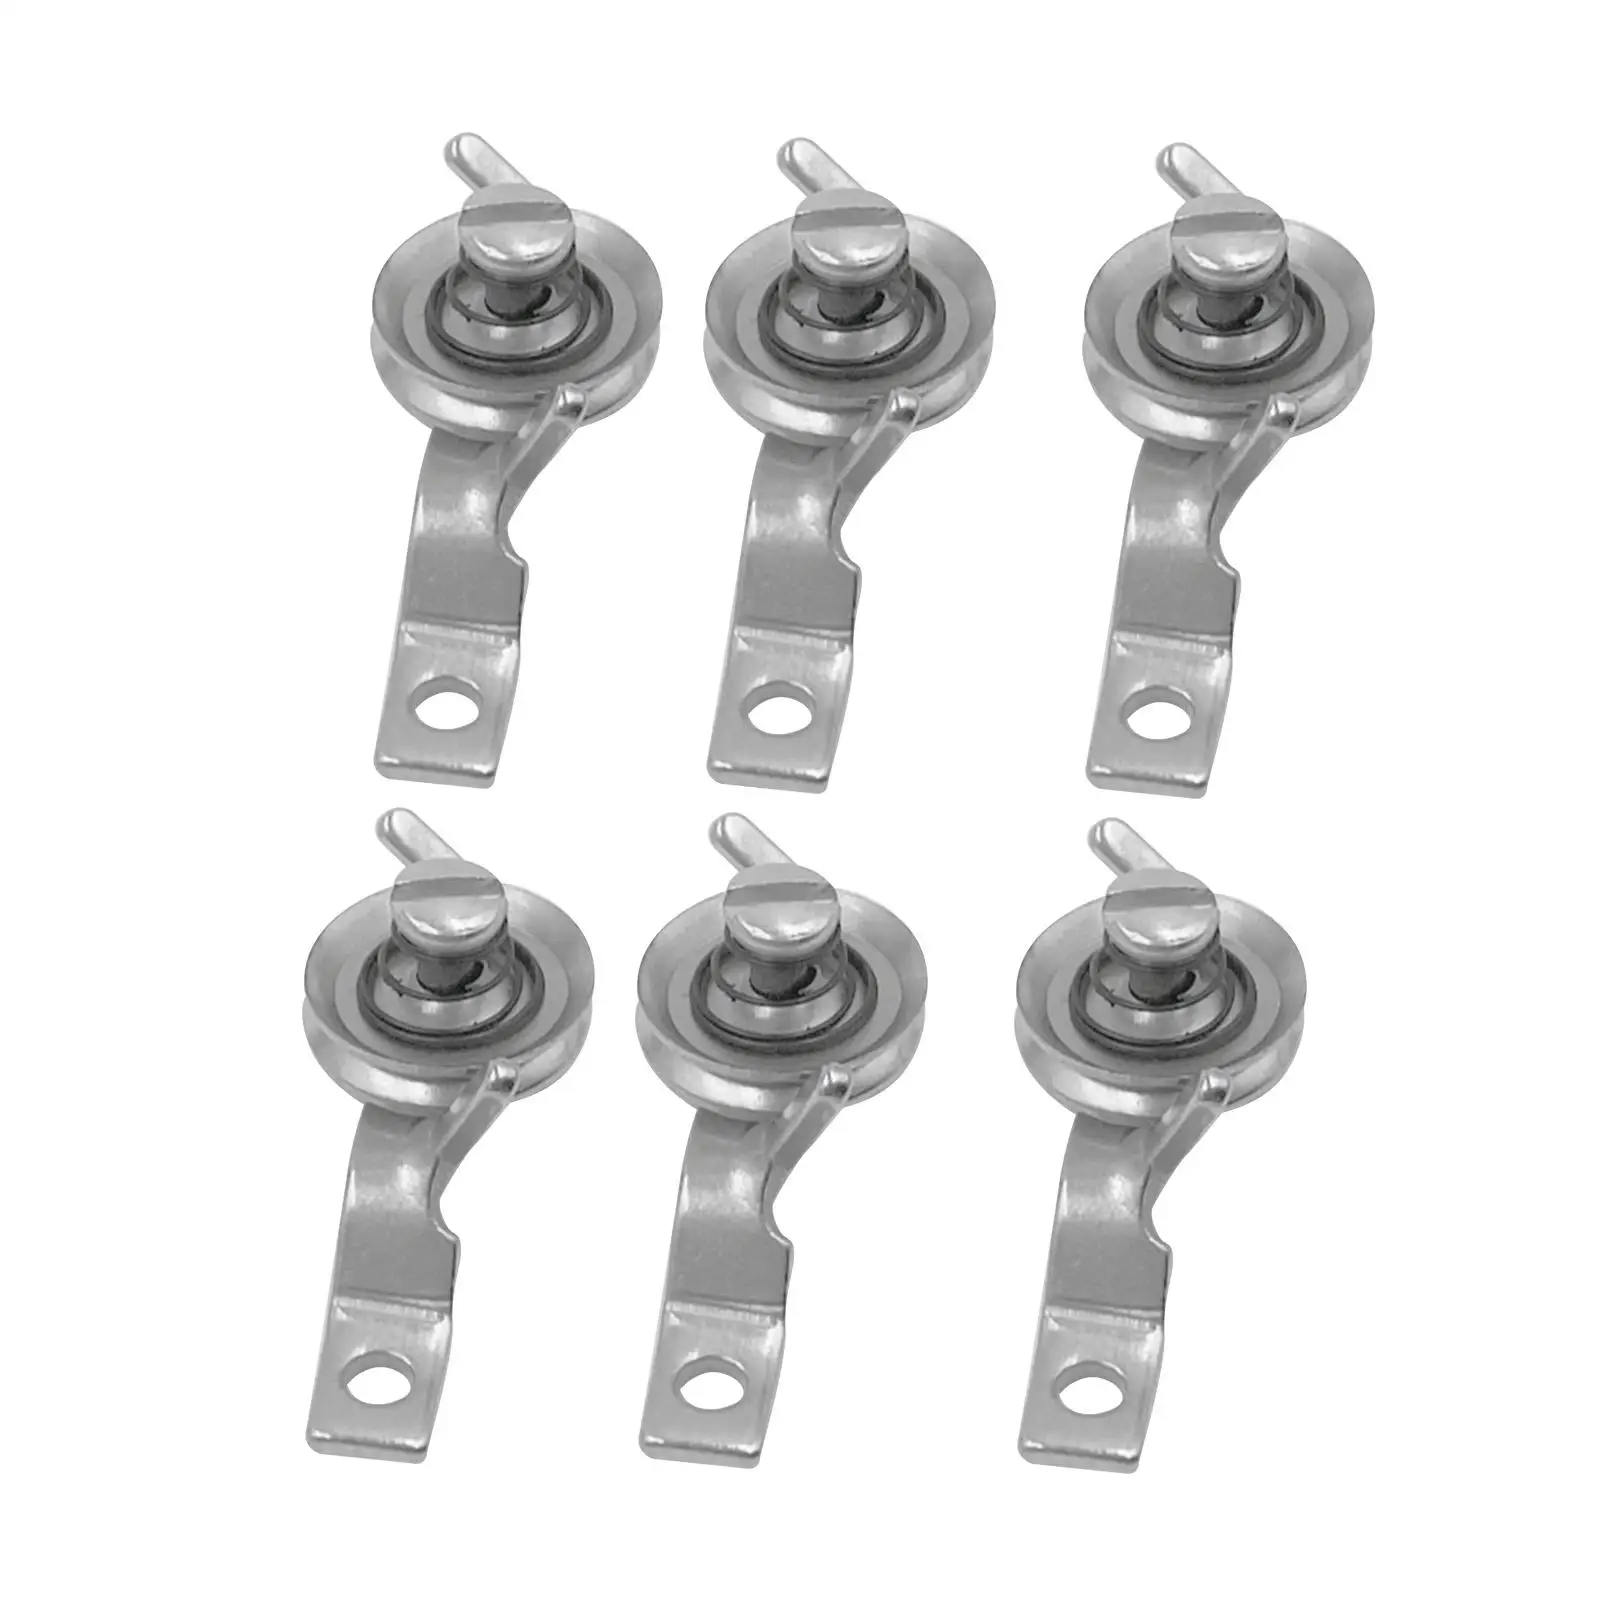 6Pcs Needle Clamp Sewing Machine Home Heavy Duty Sew Attachment Tools Thread Guide Thread Tension Assembly Replacement Parts